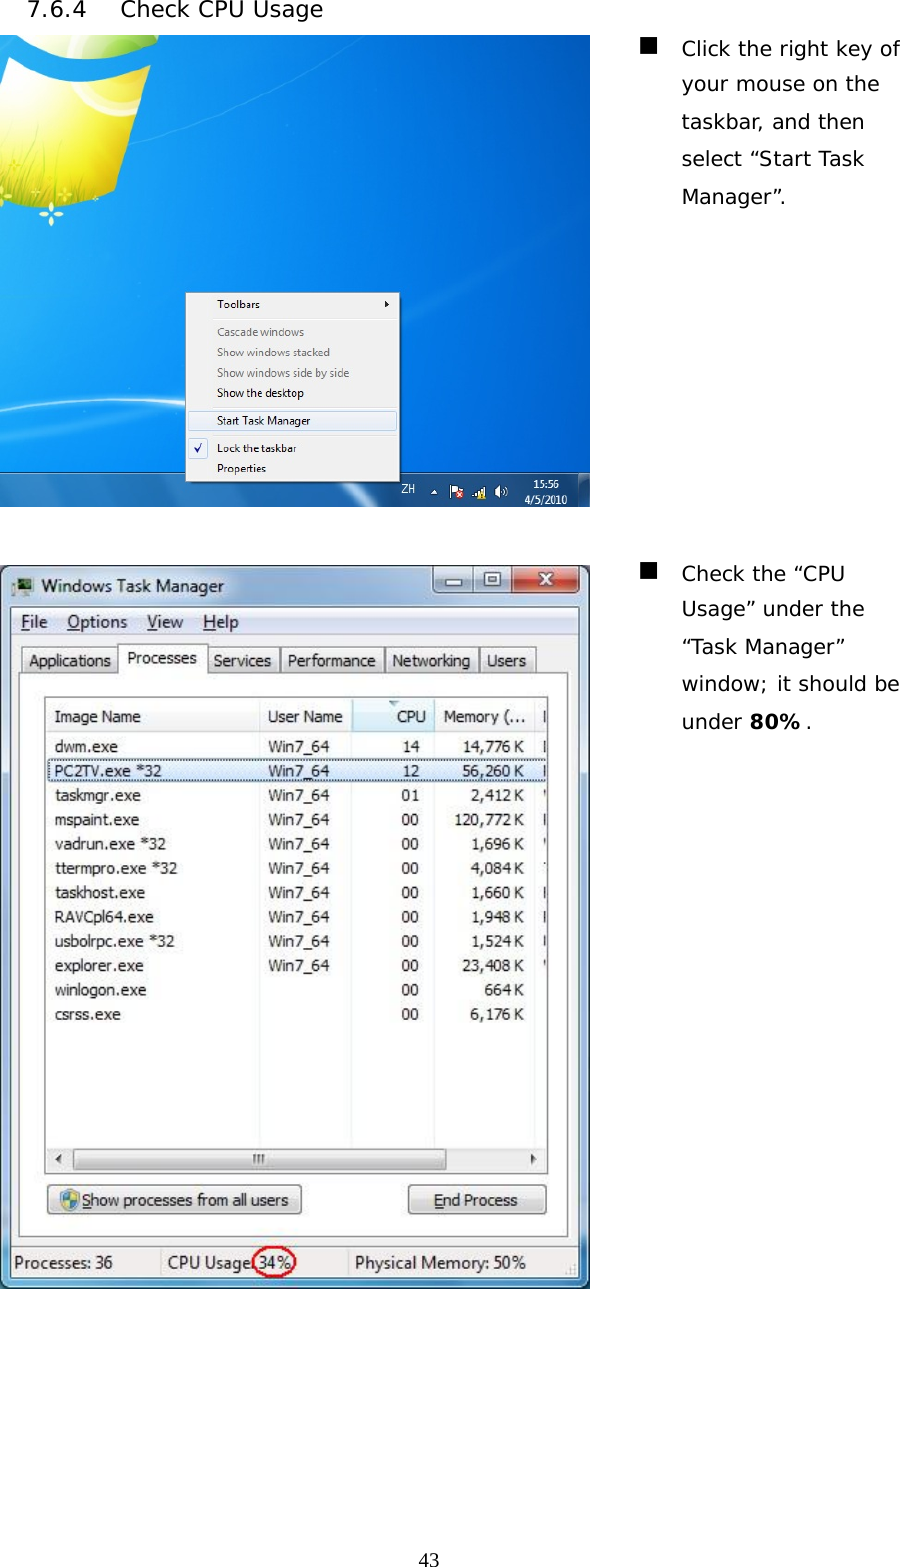   437.6.4 Check CPU Usage    Click the right key of your mouse on the taskbar, and then select “Start Task Manager”.    Check the “CPU Usage” under the “Task Manager” window; it should be under 80%. 